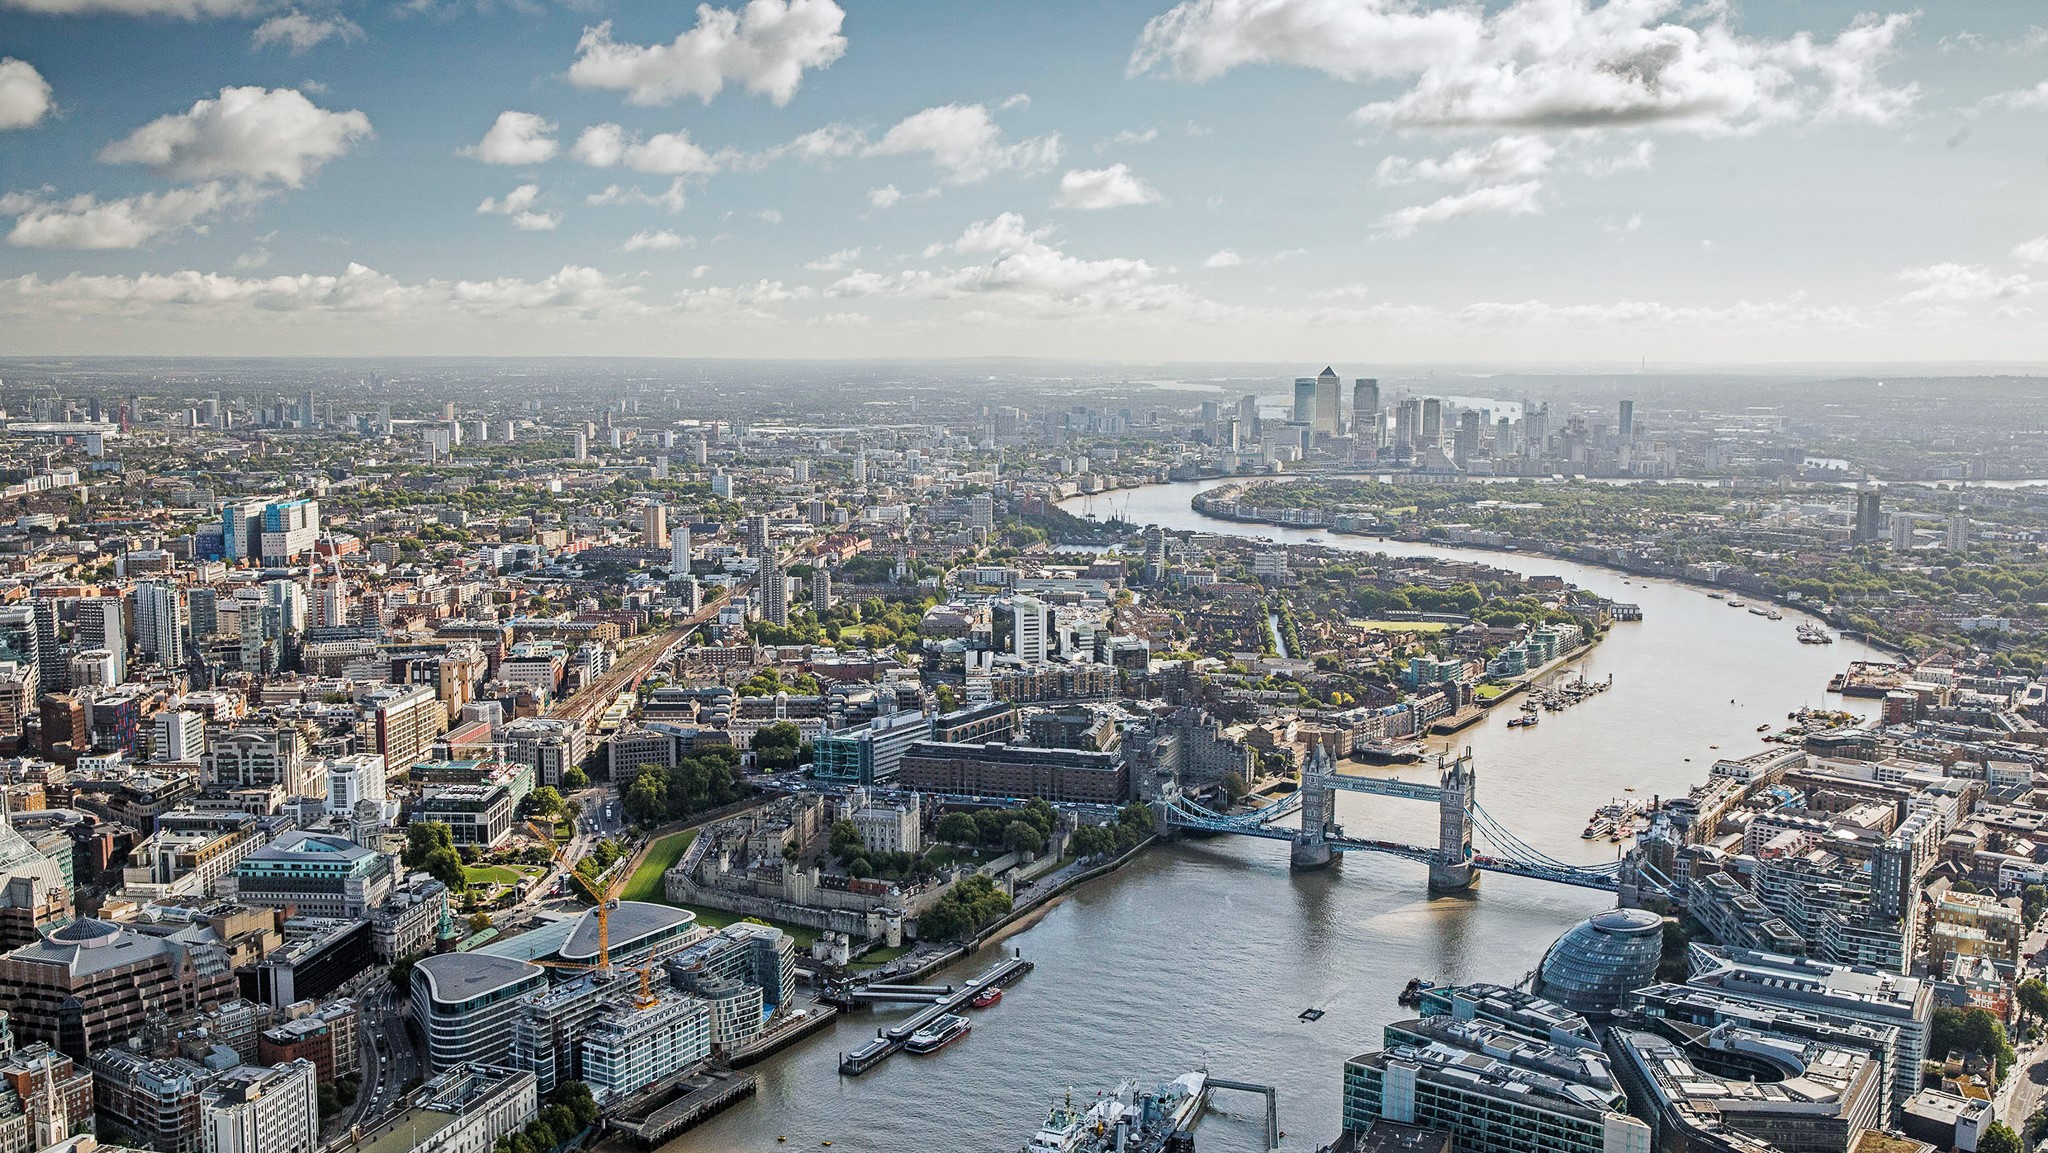 A photo of London taken from an aerial view